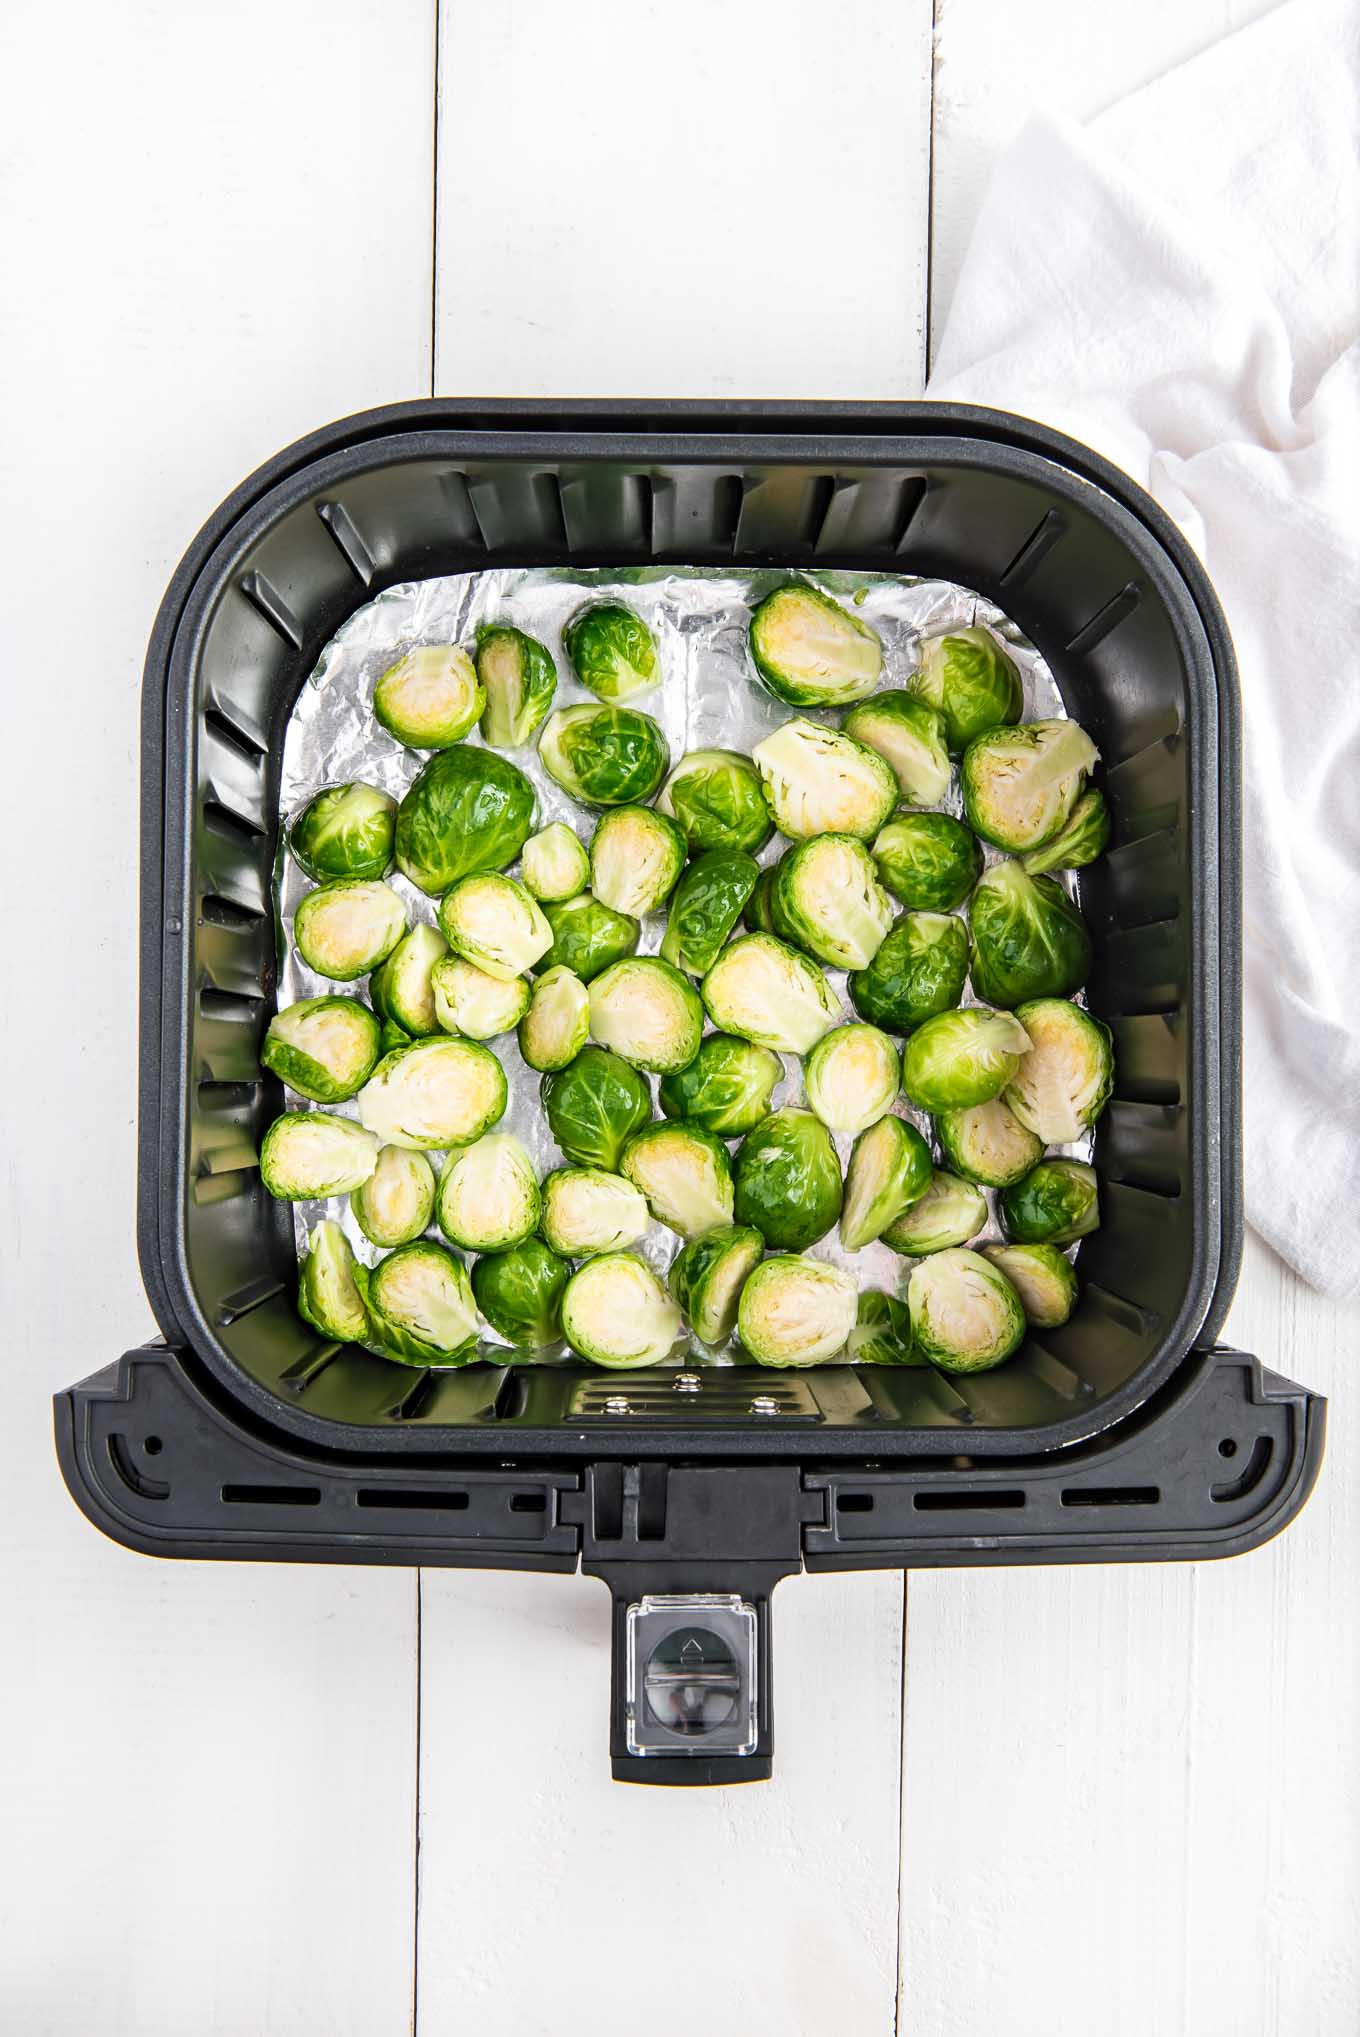 An overhead image of halved Brussels sprouts laid out in the air fryer basket.